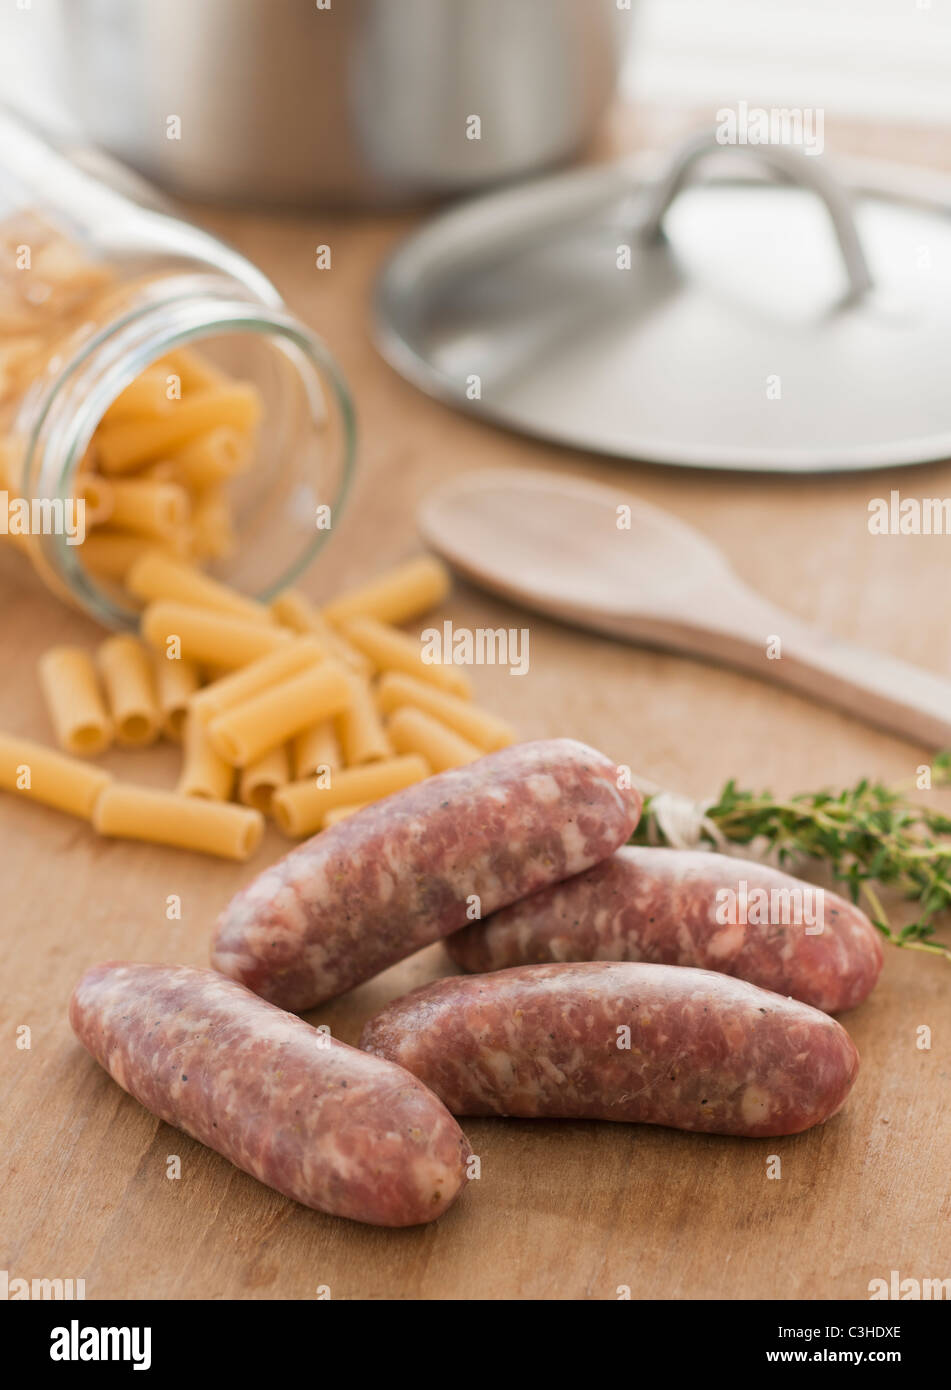 Raw sausage and pasta on kitchen table Stock Photo